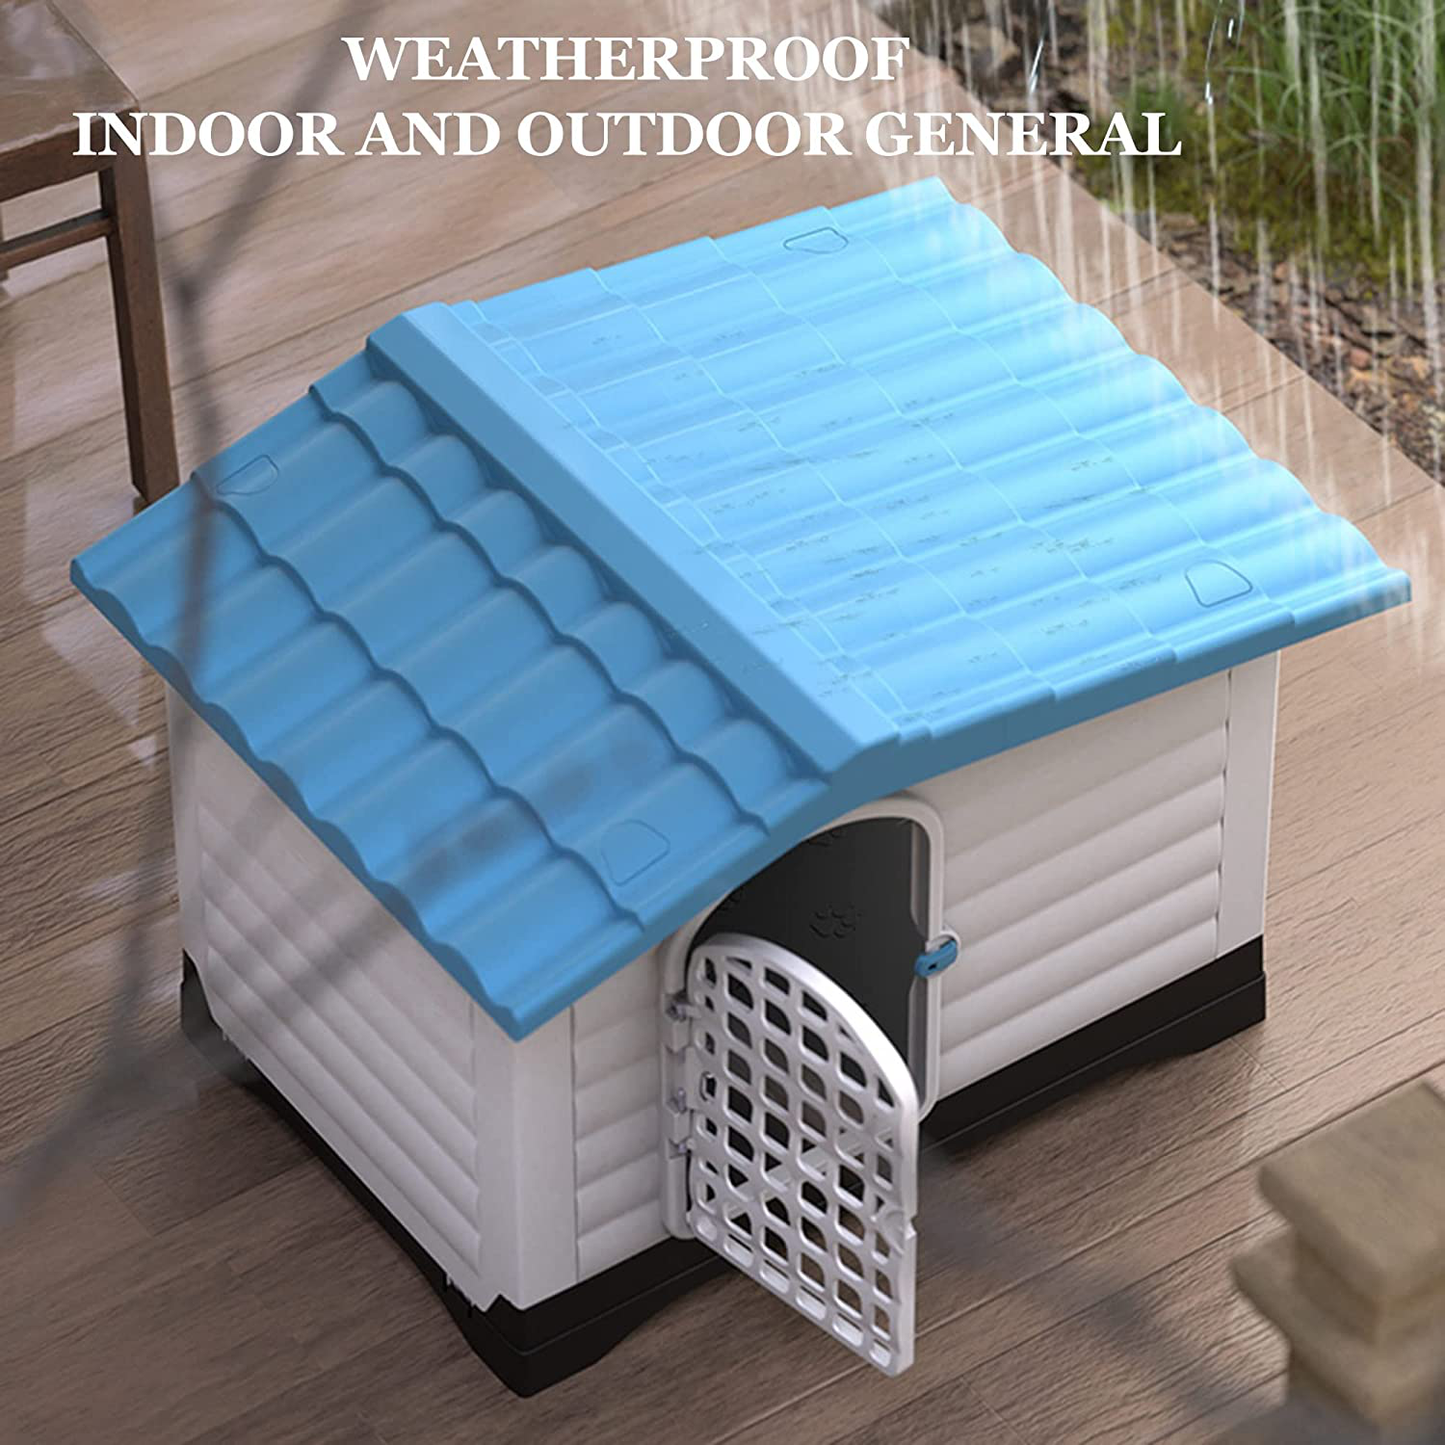 WEIE Plastic Dog Houses, Indoor Outdoor Waterproof Dog Kennel,Insulated Dog House for Small Medium Large Dogs, Easy to Assemble, No Tools Required for Assembly